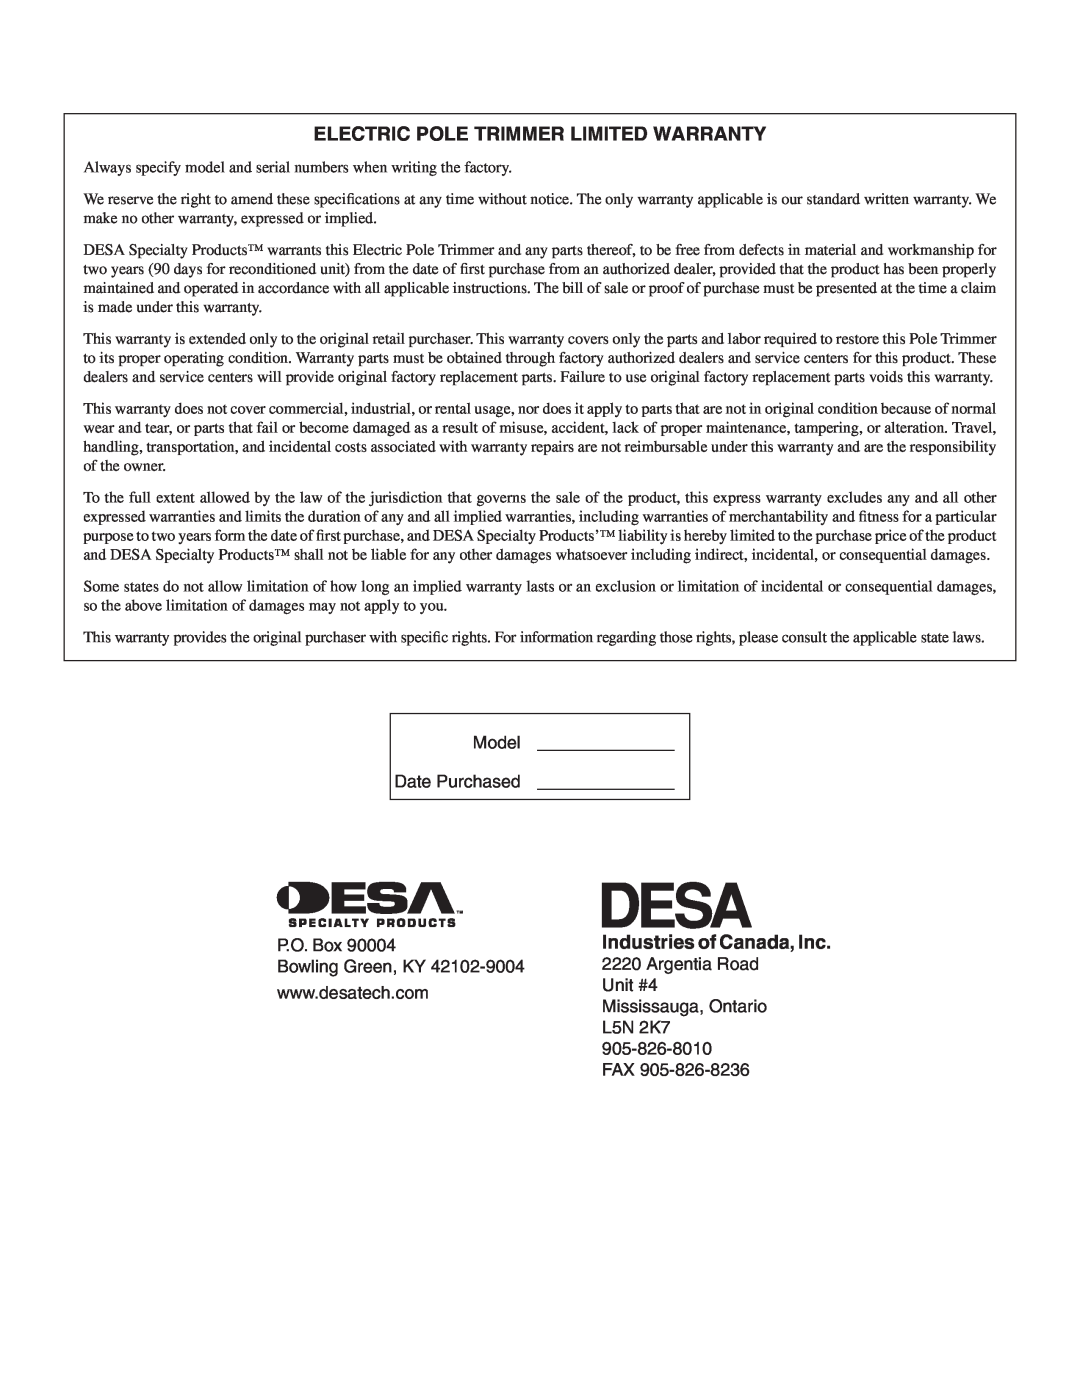 Desa 110946-01A owner manual Electric Pole Trimmer Limited Warranty, Industries of Canada, Inc 